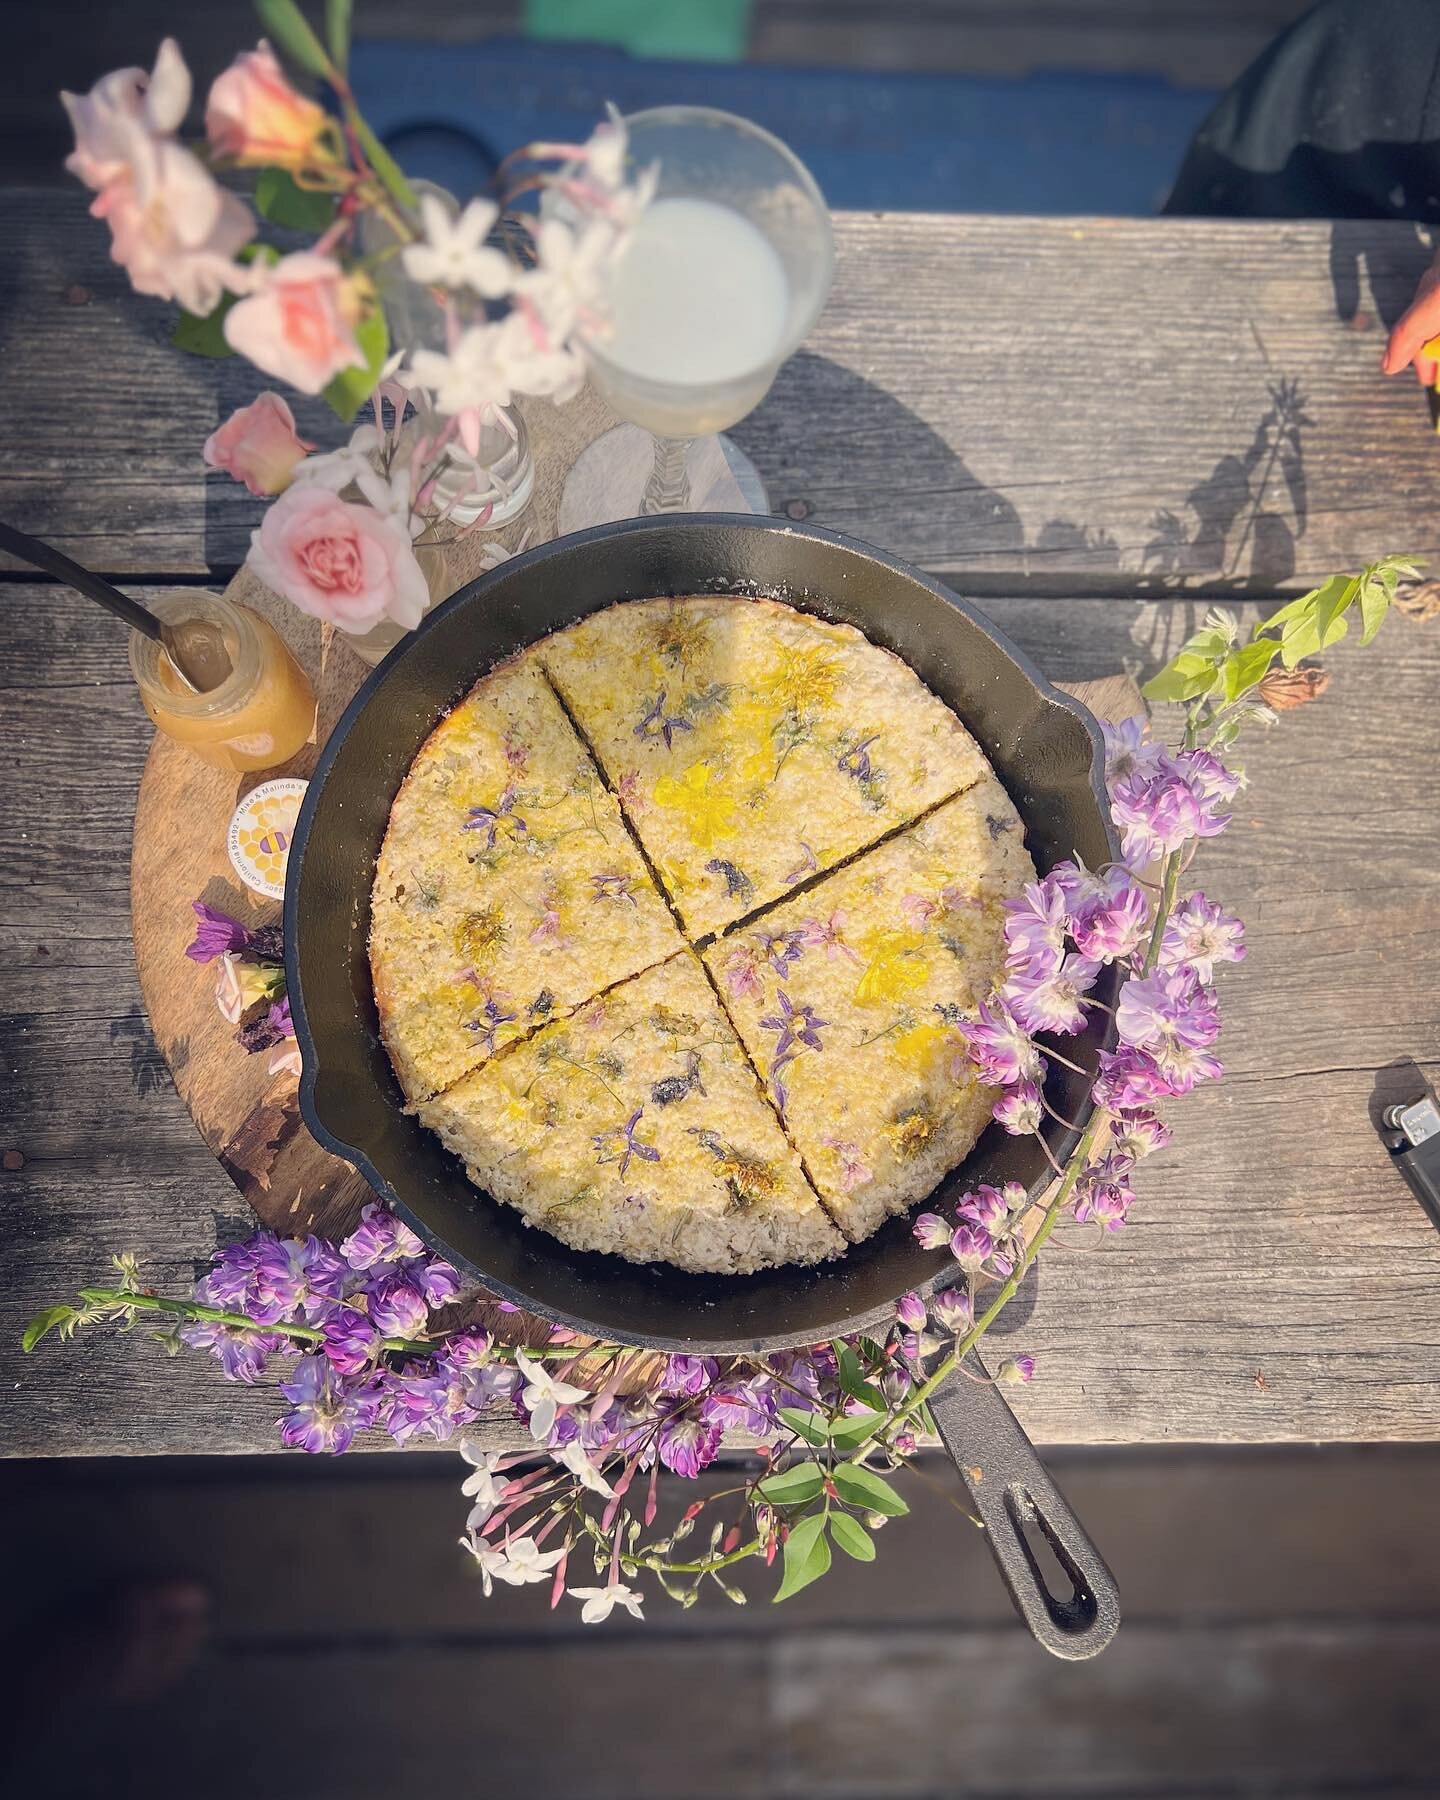 Today we foraged for wild edible flowers in the neighborhood and then baked them into an ancestral bannock oat cake. It was a perfect way to usher in Beltane! #motherrootsvillage #mayday #beltane #ancestralremembrance #theoldways #gathervictoriarecip